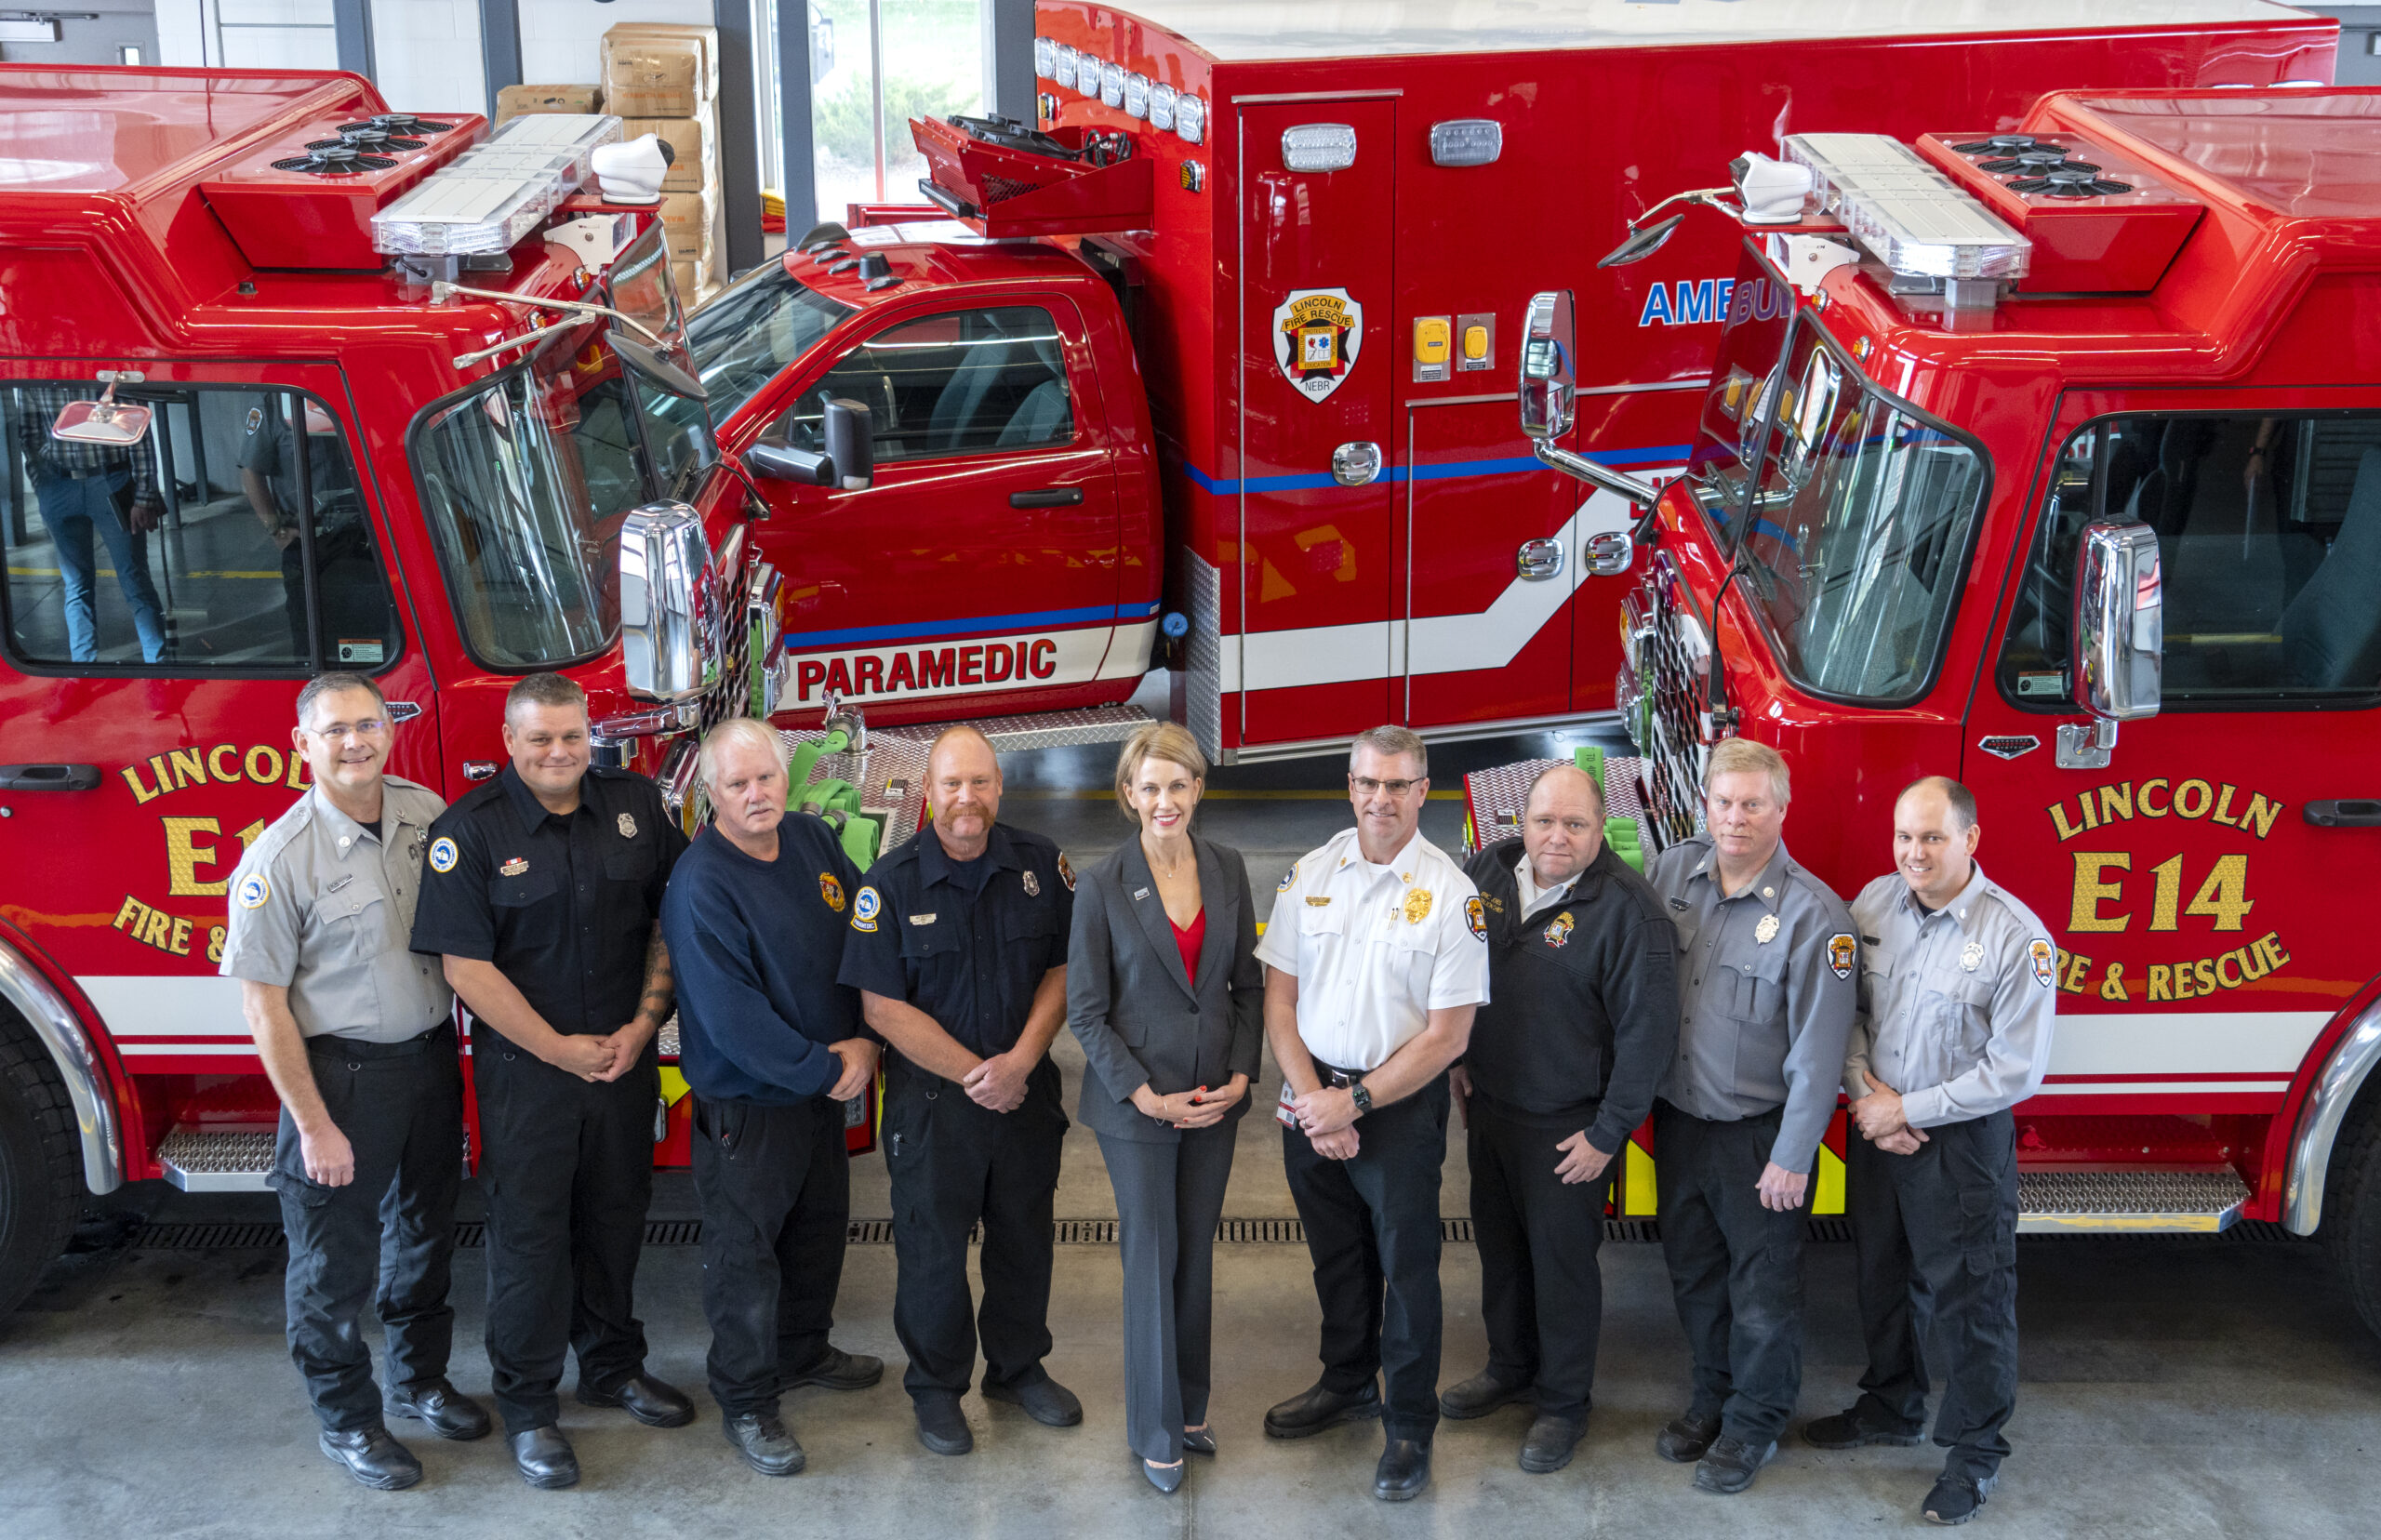 Lincoln Fire and Rescue standing with their new fire fighting trucks and ambulance.